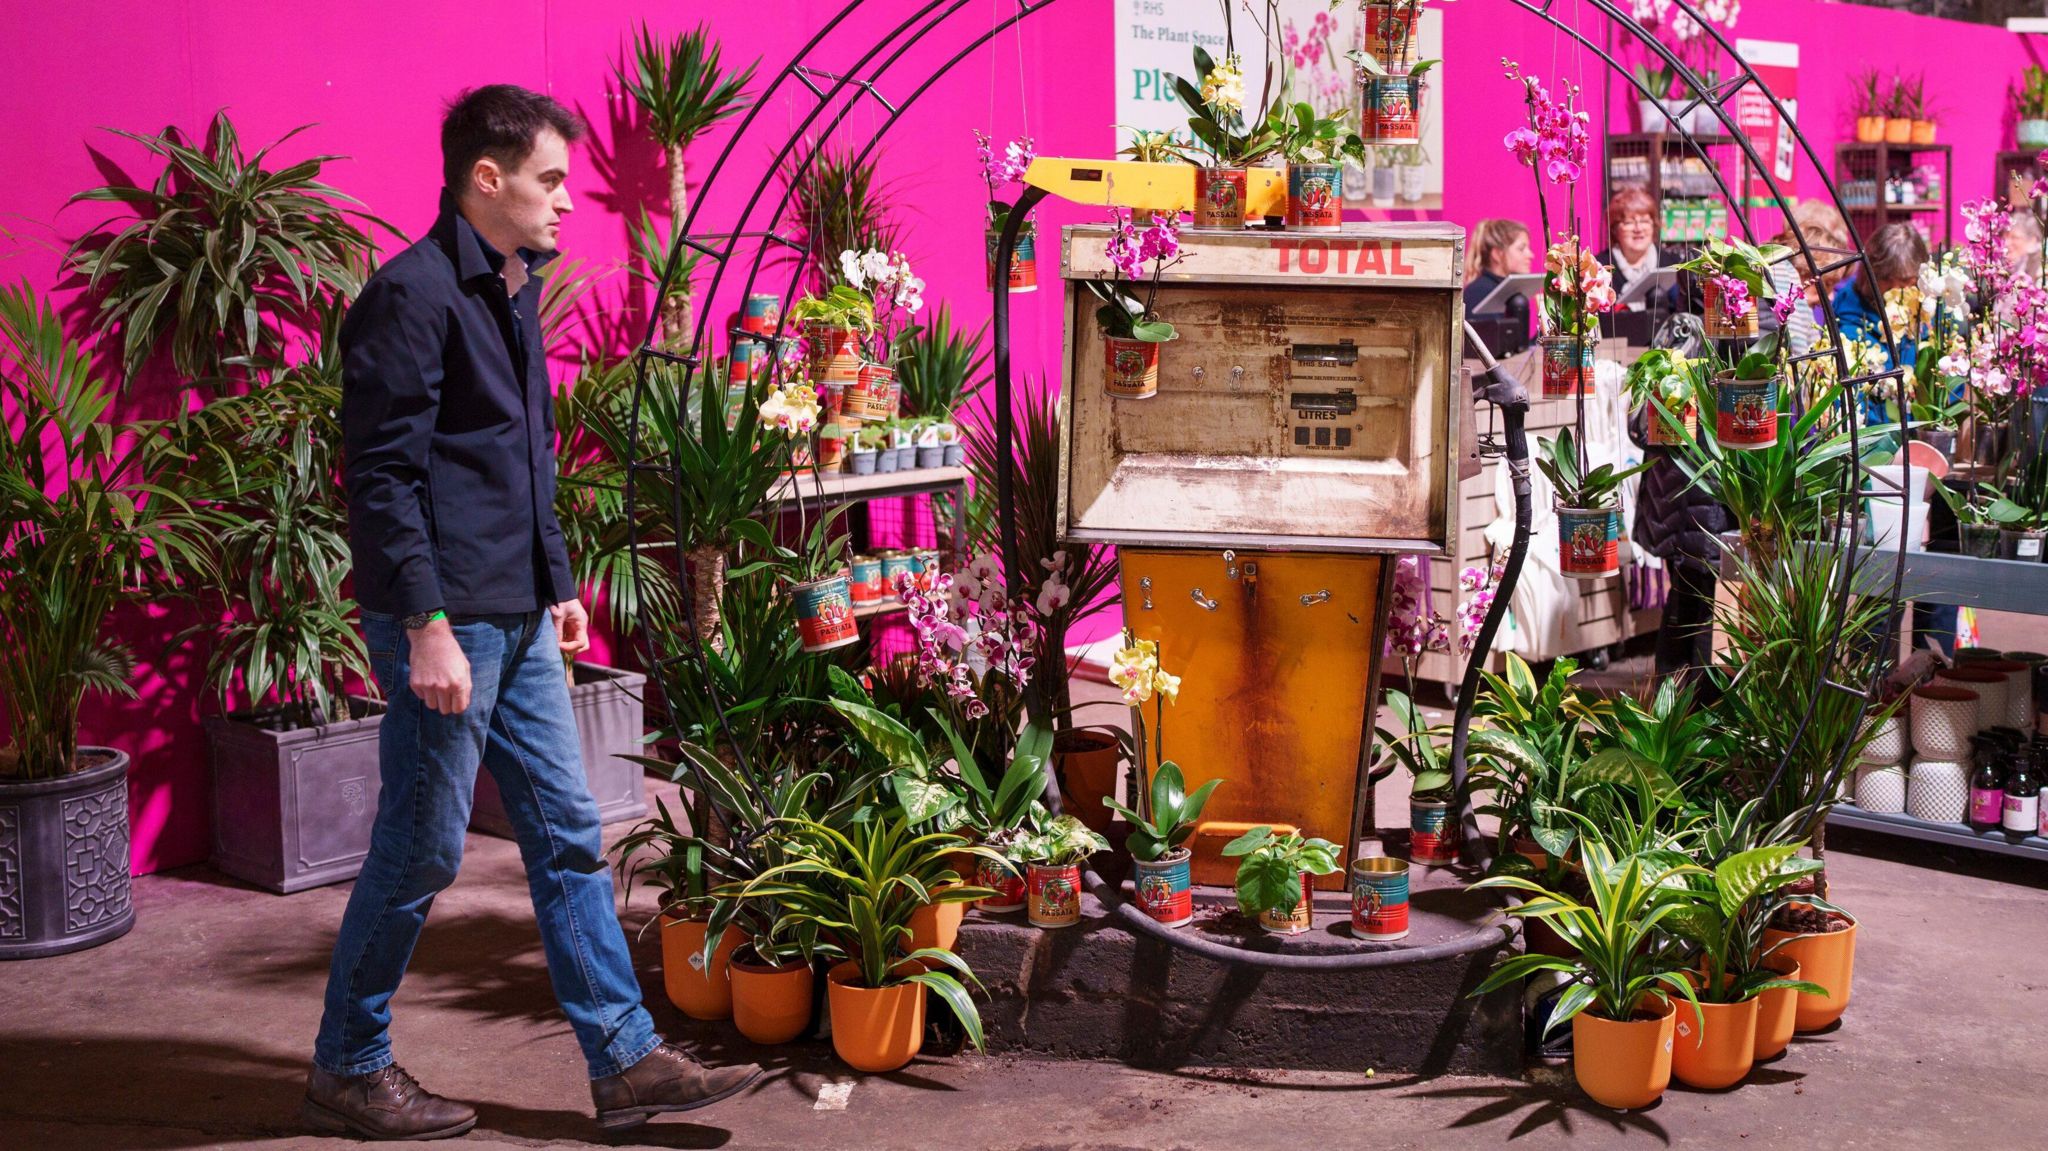 A man walks past an exhibit at the RHS Urban show in Manchester